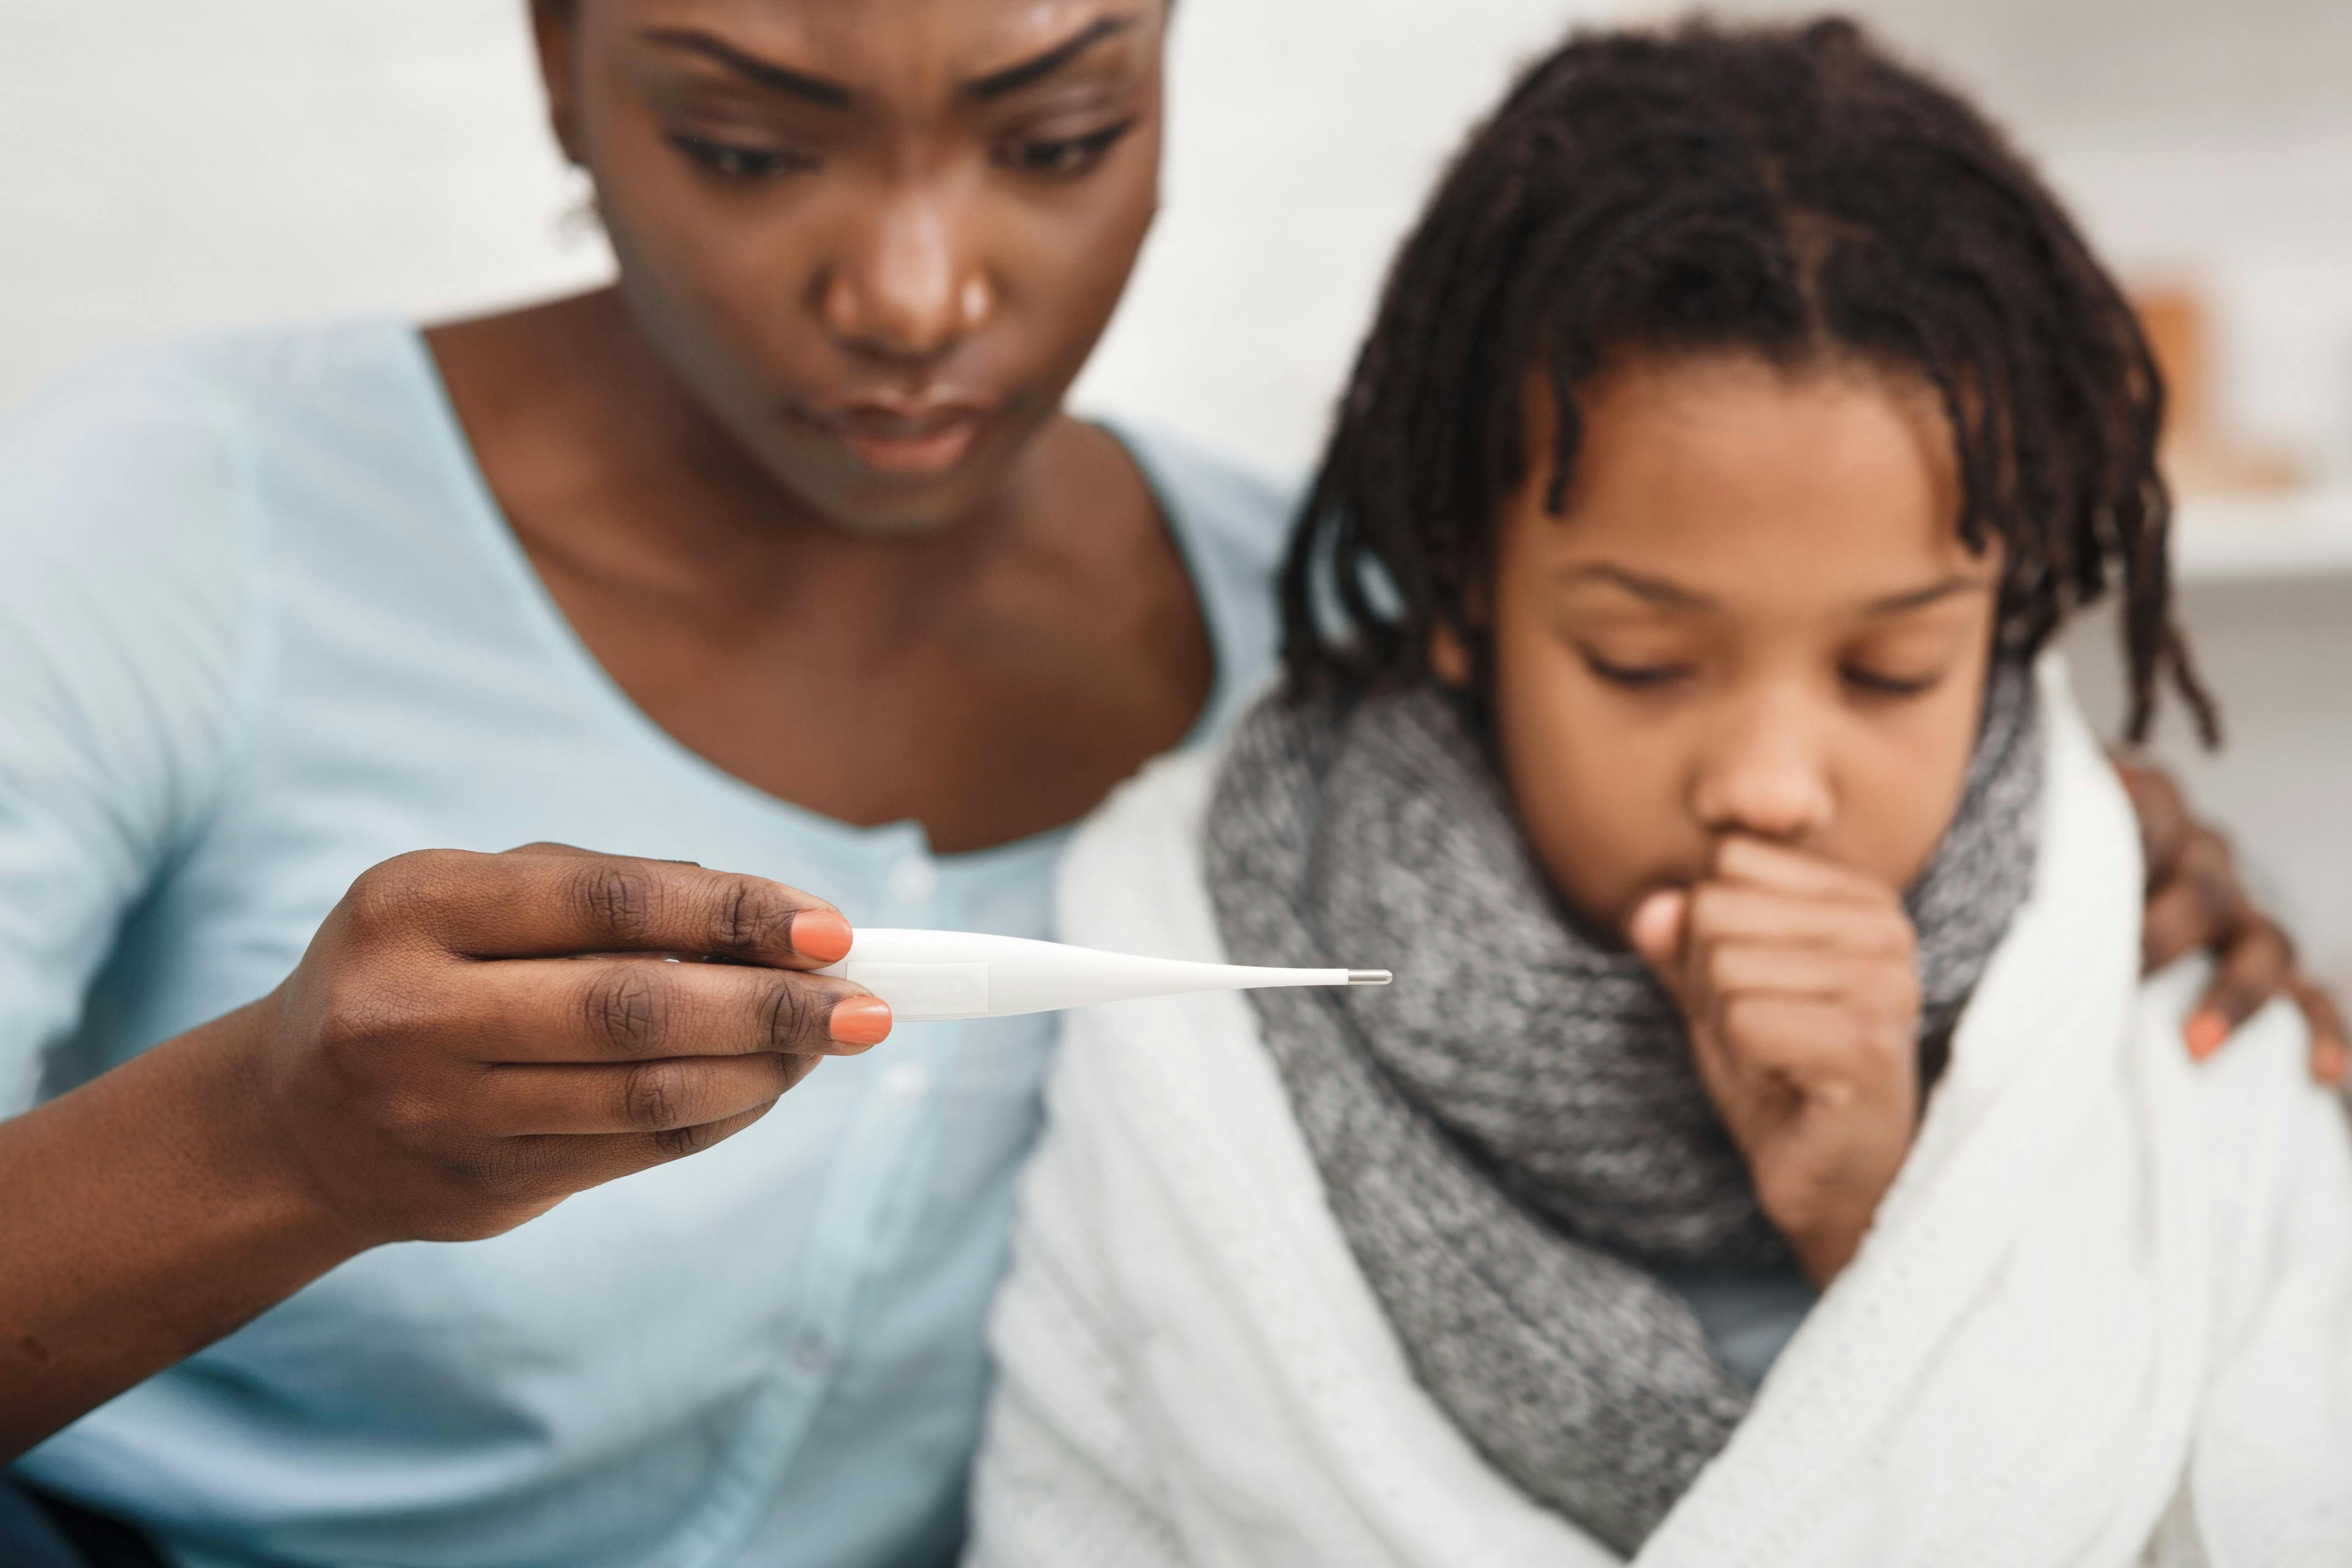 Early oseltamivir improves outcomes in children with influenza